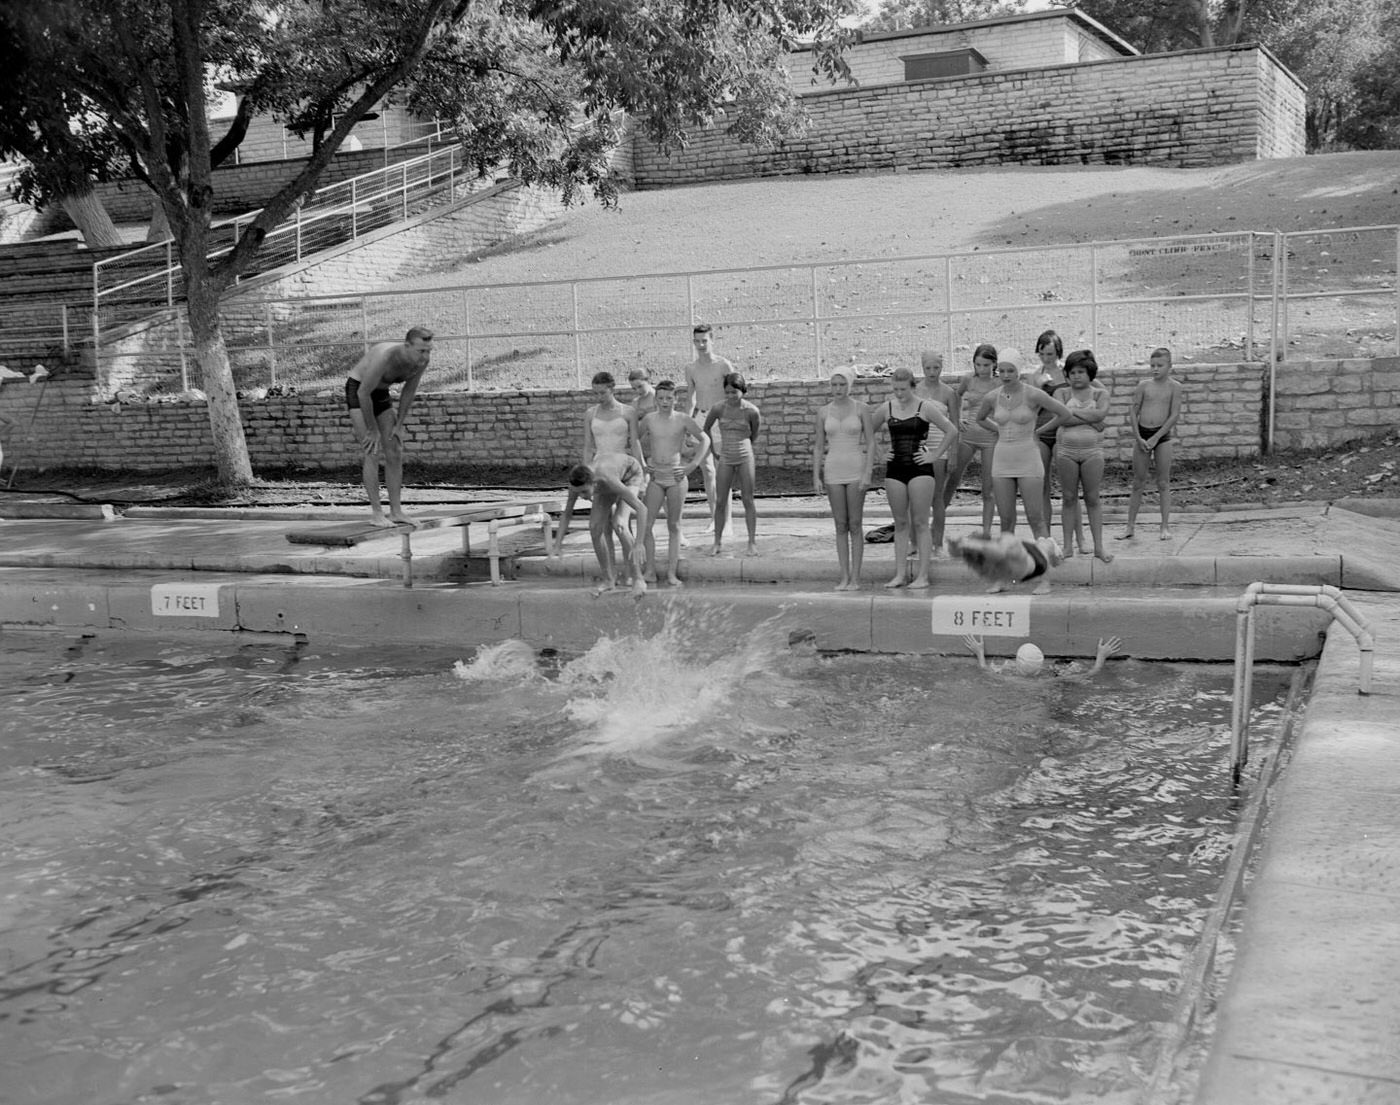 Deep Eddy Pool Scene with Boys and Girls Observing Swimmers, 1953.